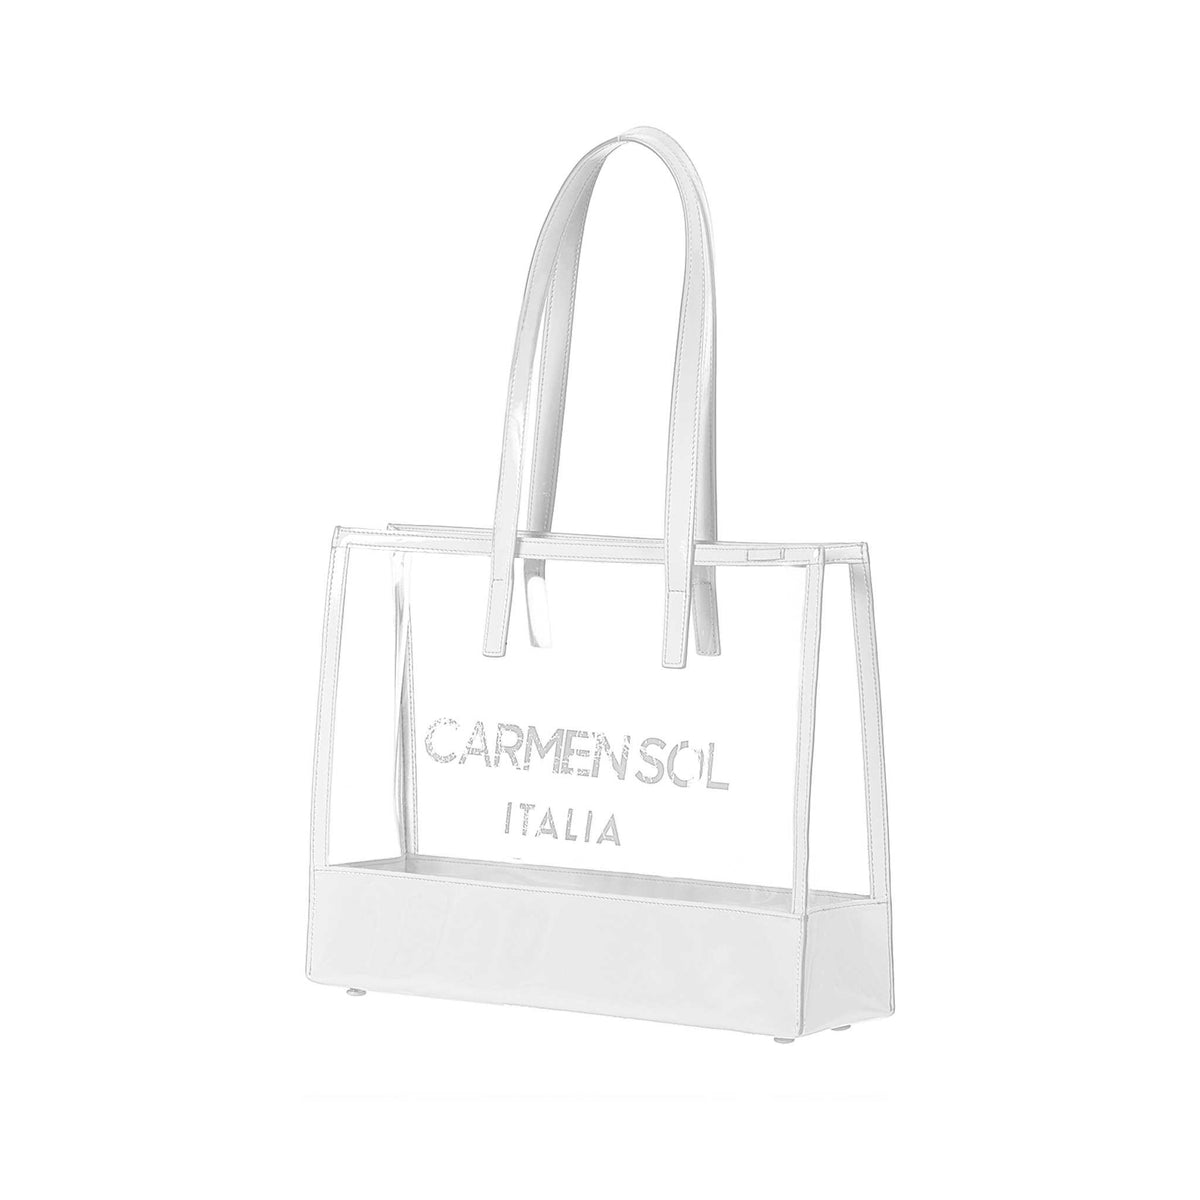 large tote bags for women in color white perfect for any outfit